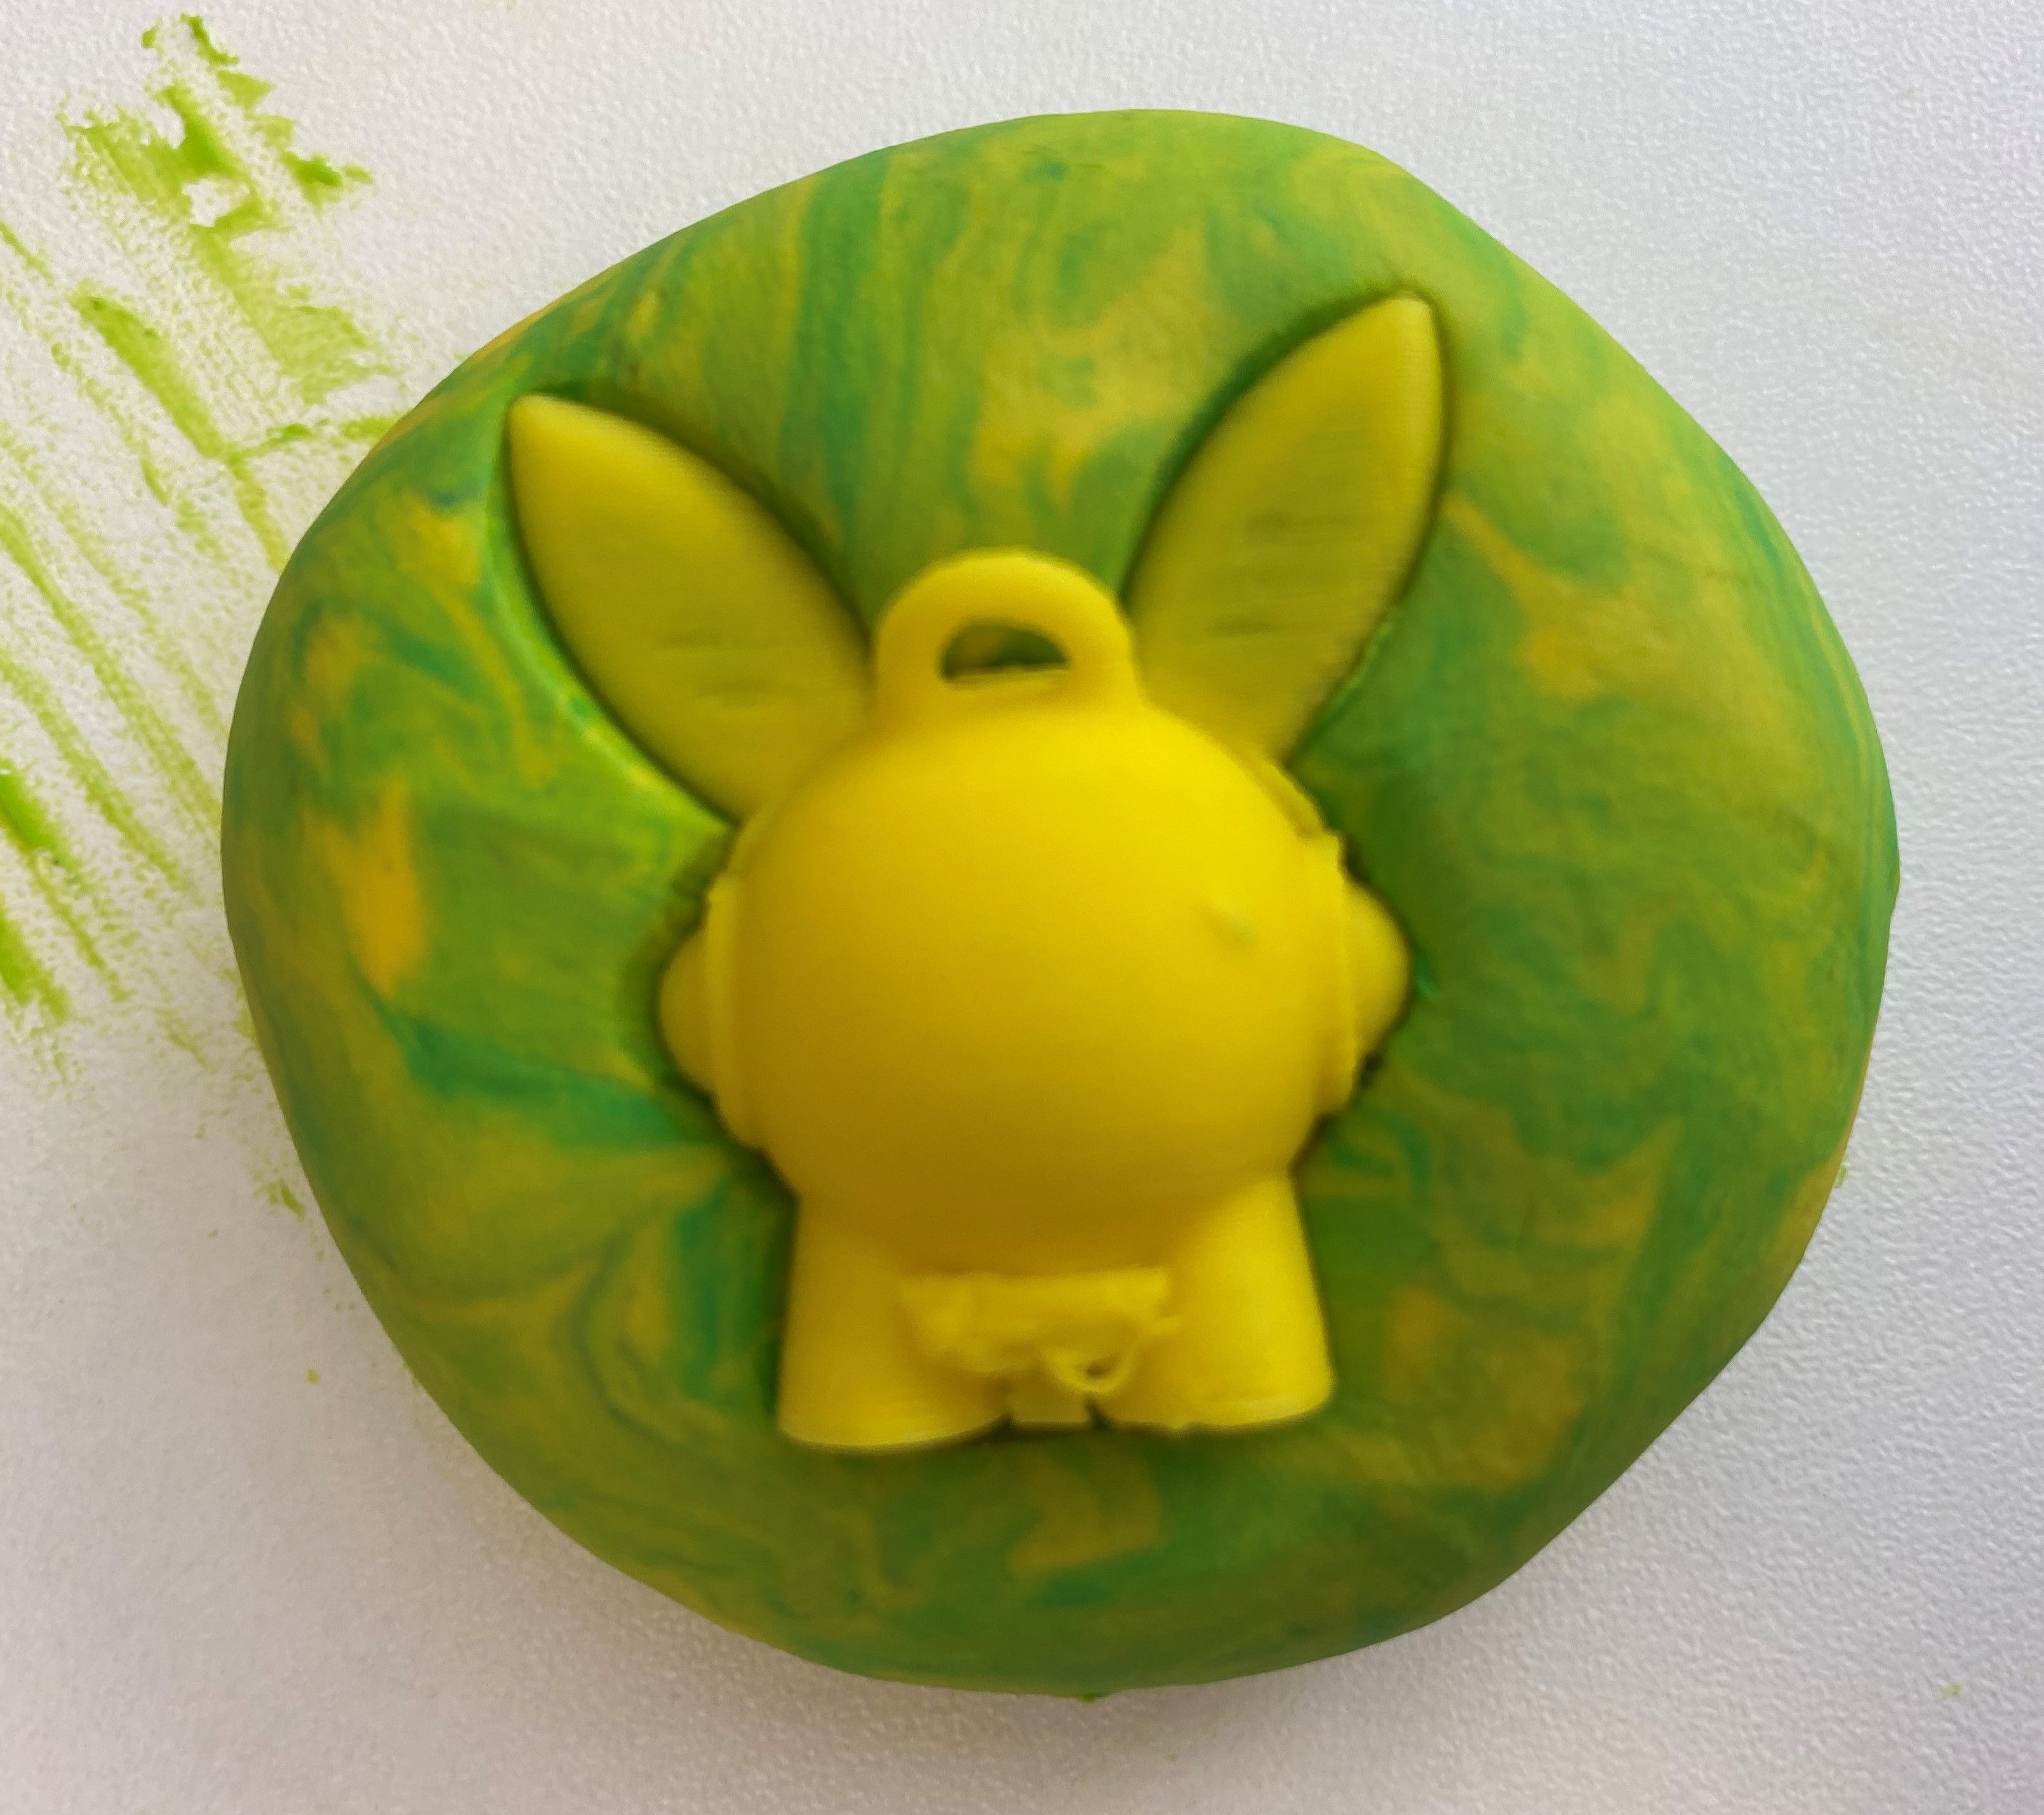 Top half of the rabbit 3d printed toy pushed into the green ball of playdough